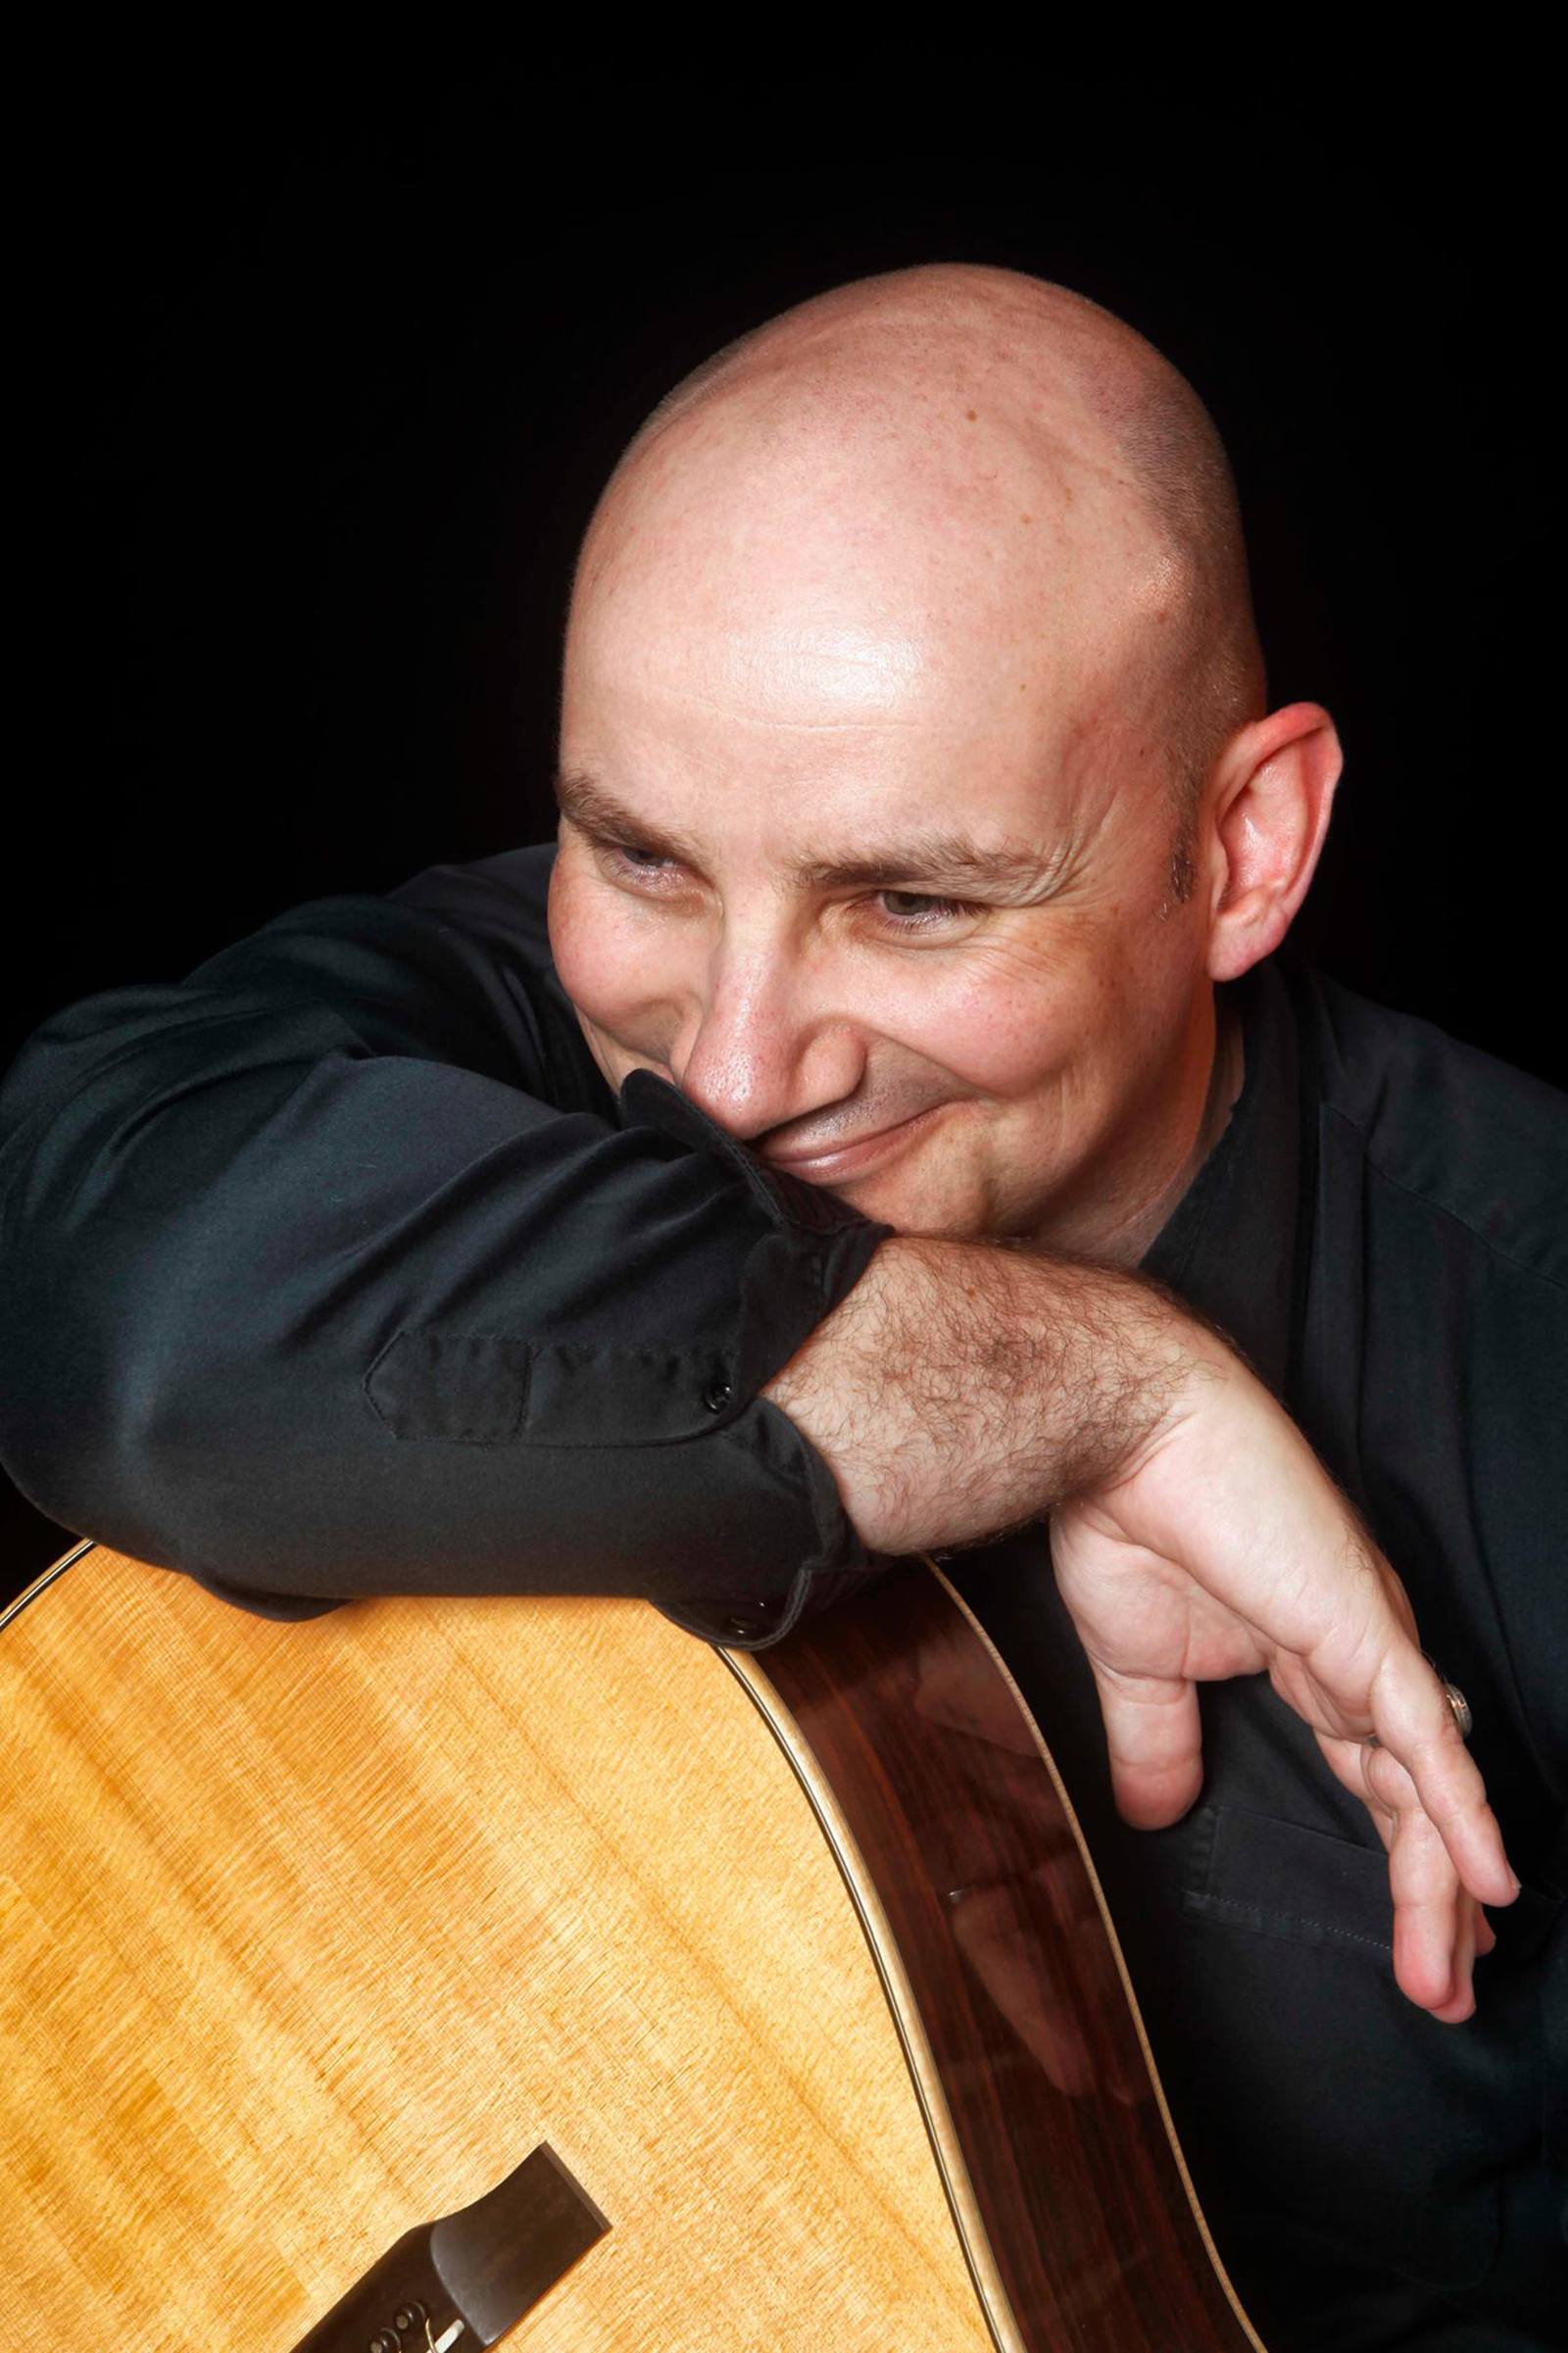 GIFTED - Singer/songwriter Eric Dubeau is looking forward to showcasing his array of tunes in a house concert on April 8th on Birch Bay near Bentley.